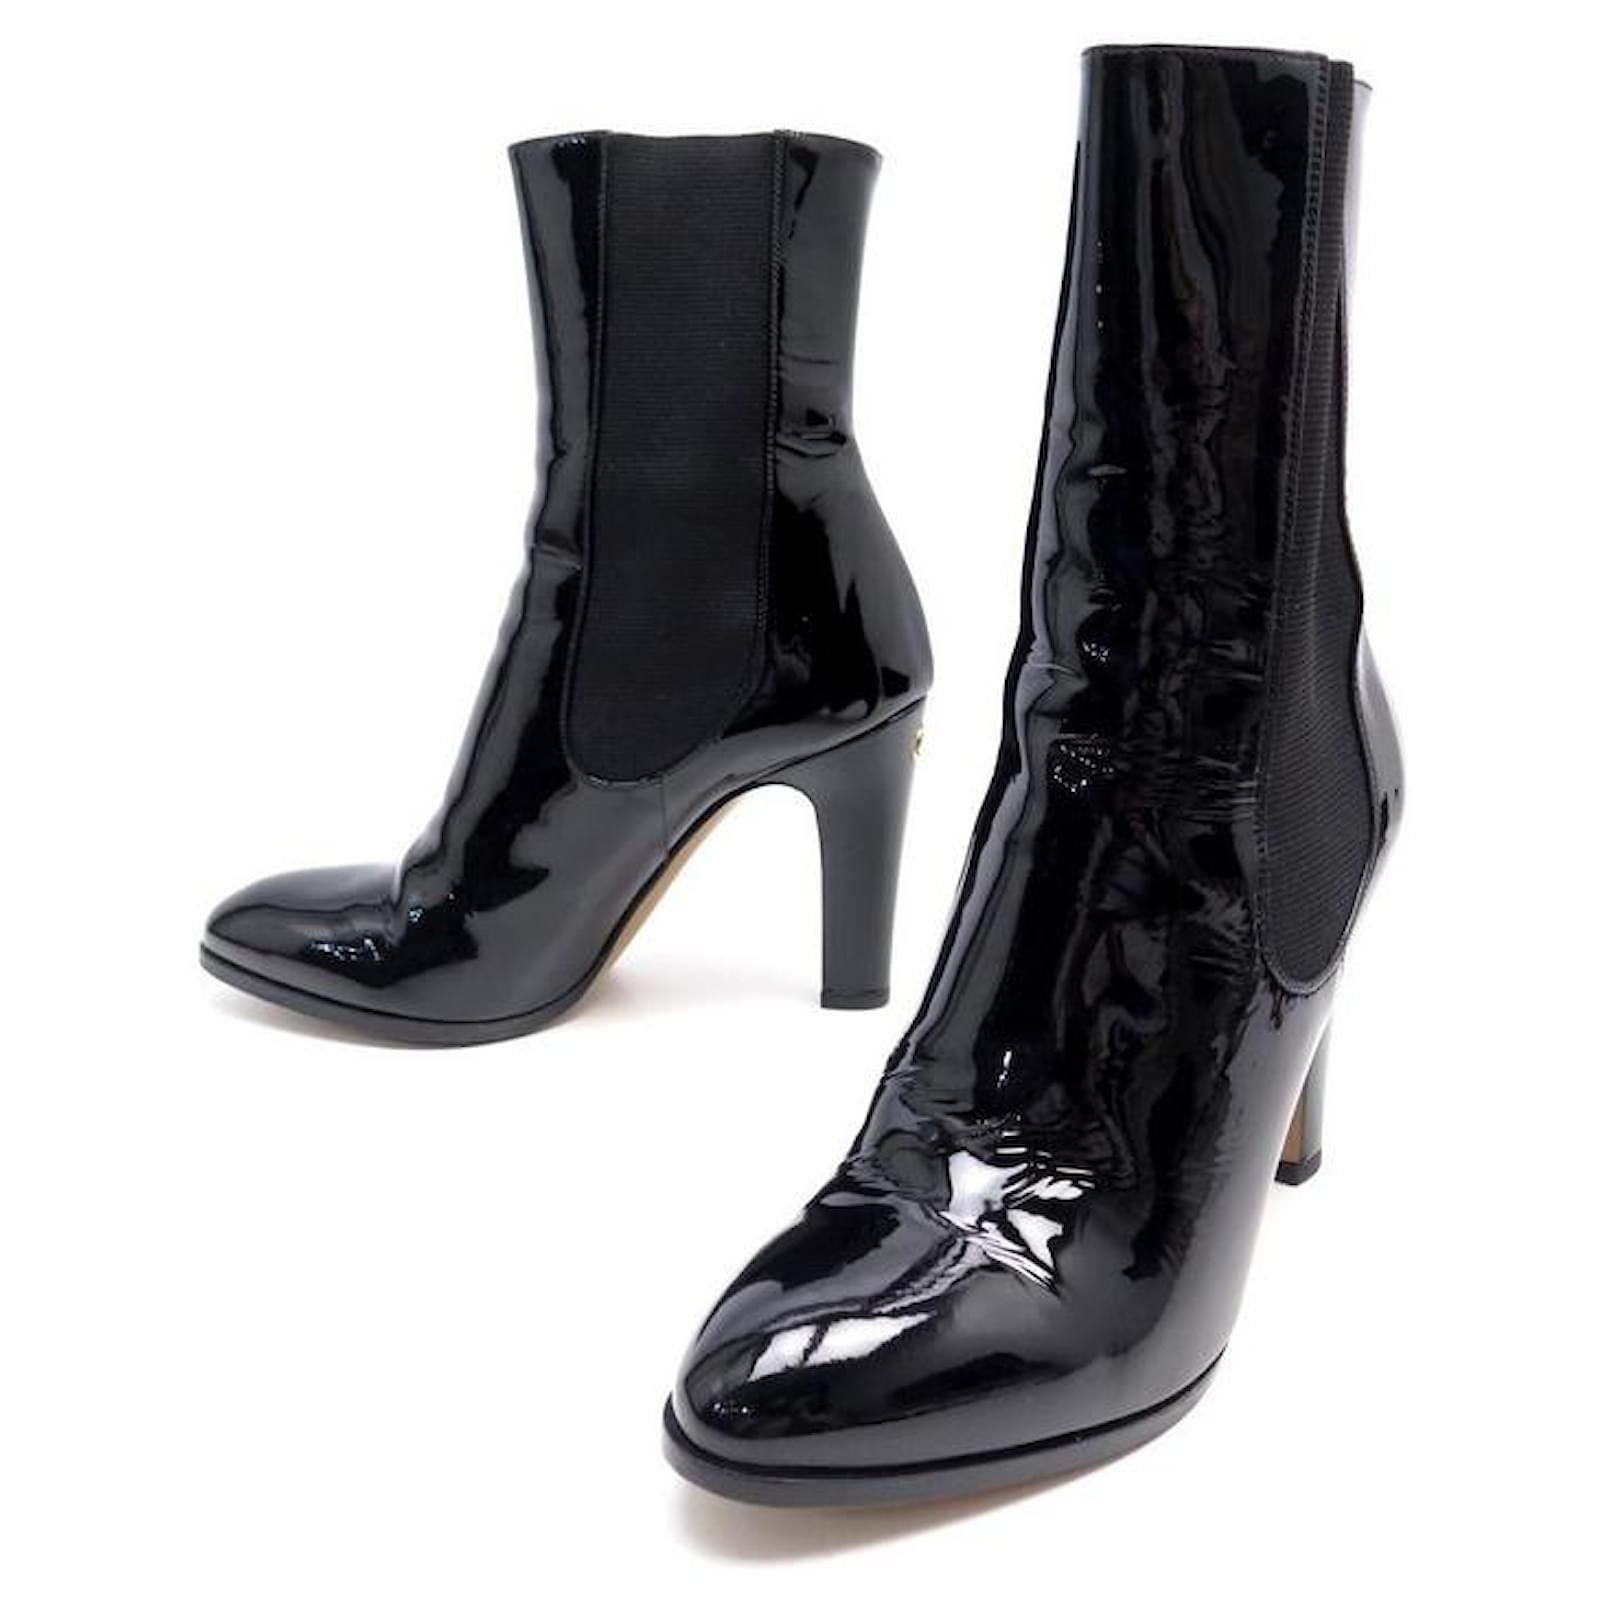 CHANEL ANKLE BOOTS G30090 38.5 BLACK PATENT LEATHER + BOOTS SHOES BOX